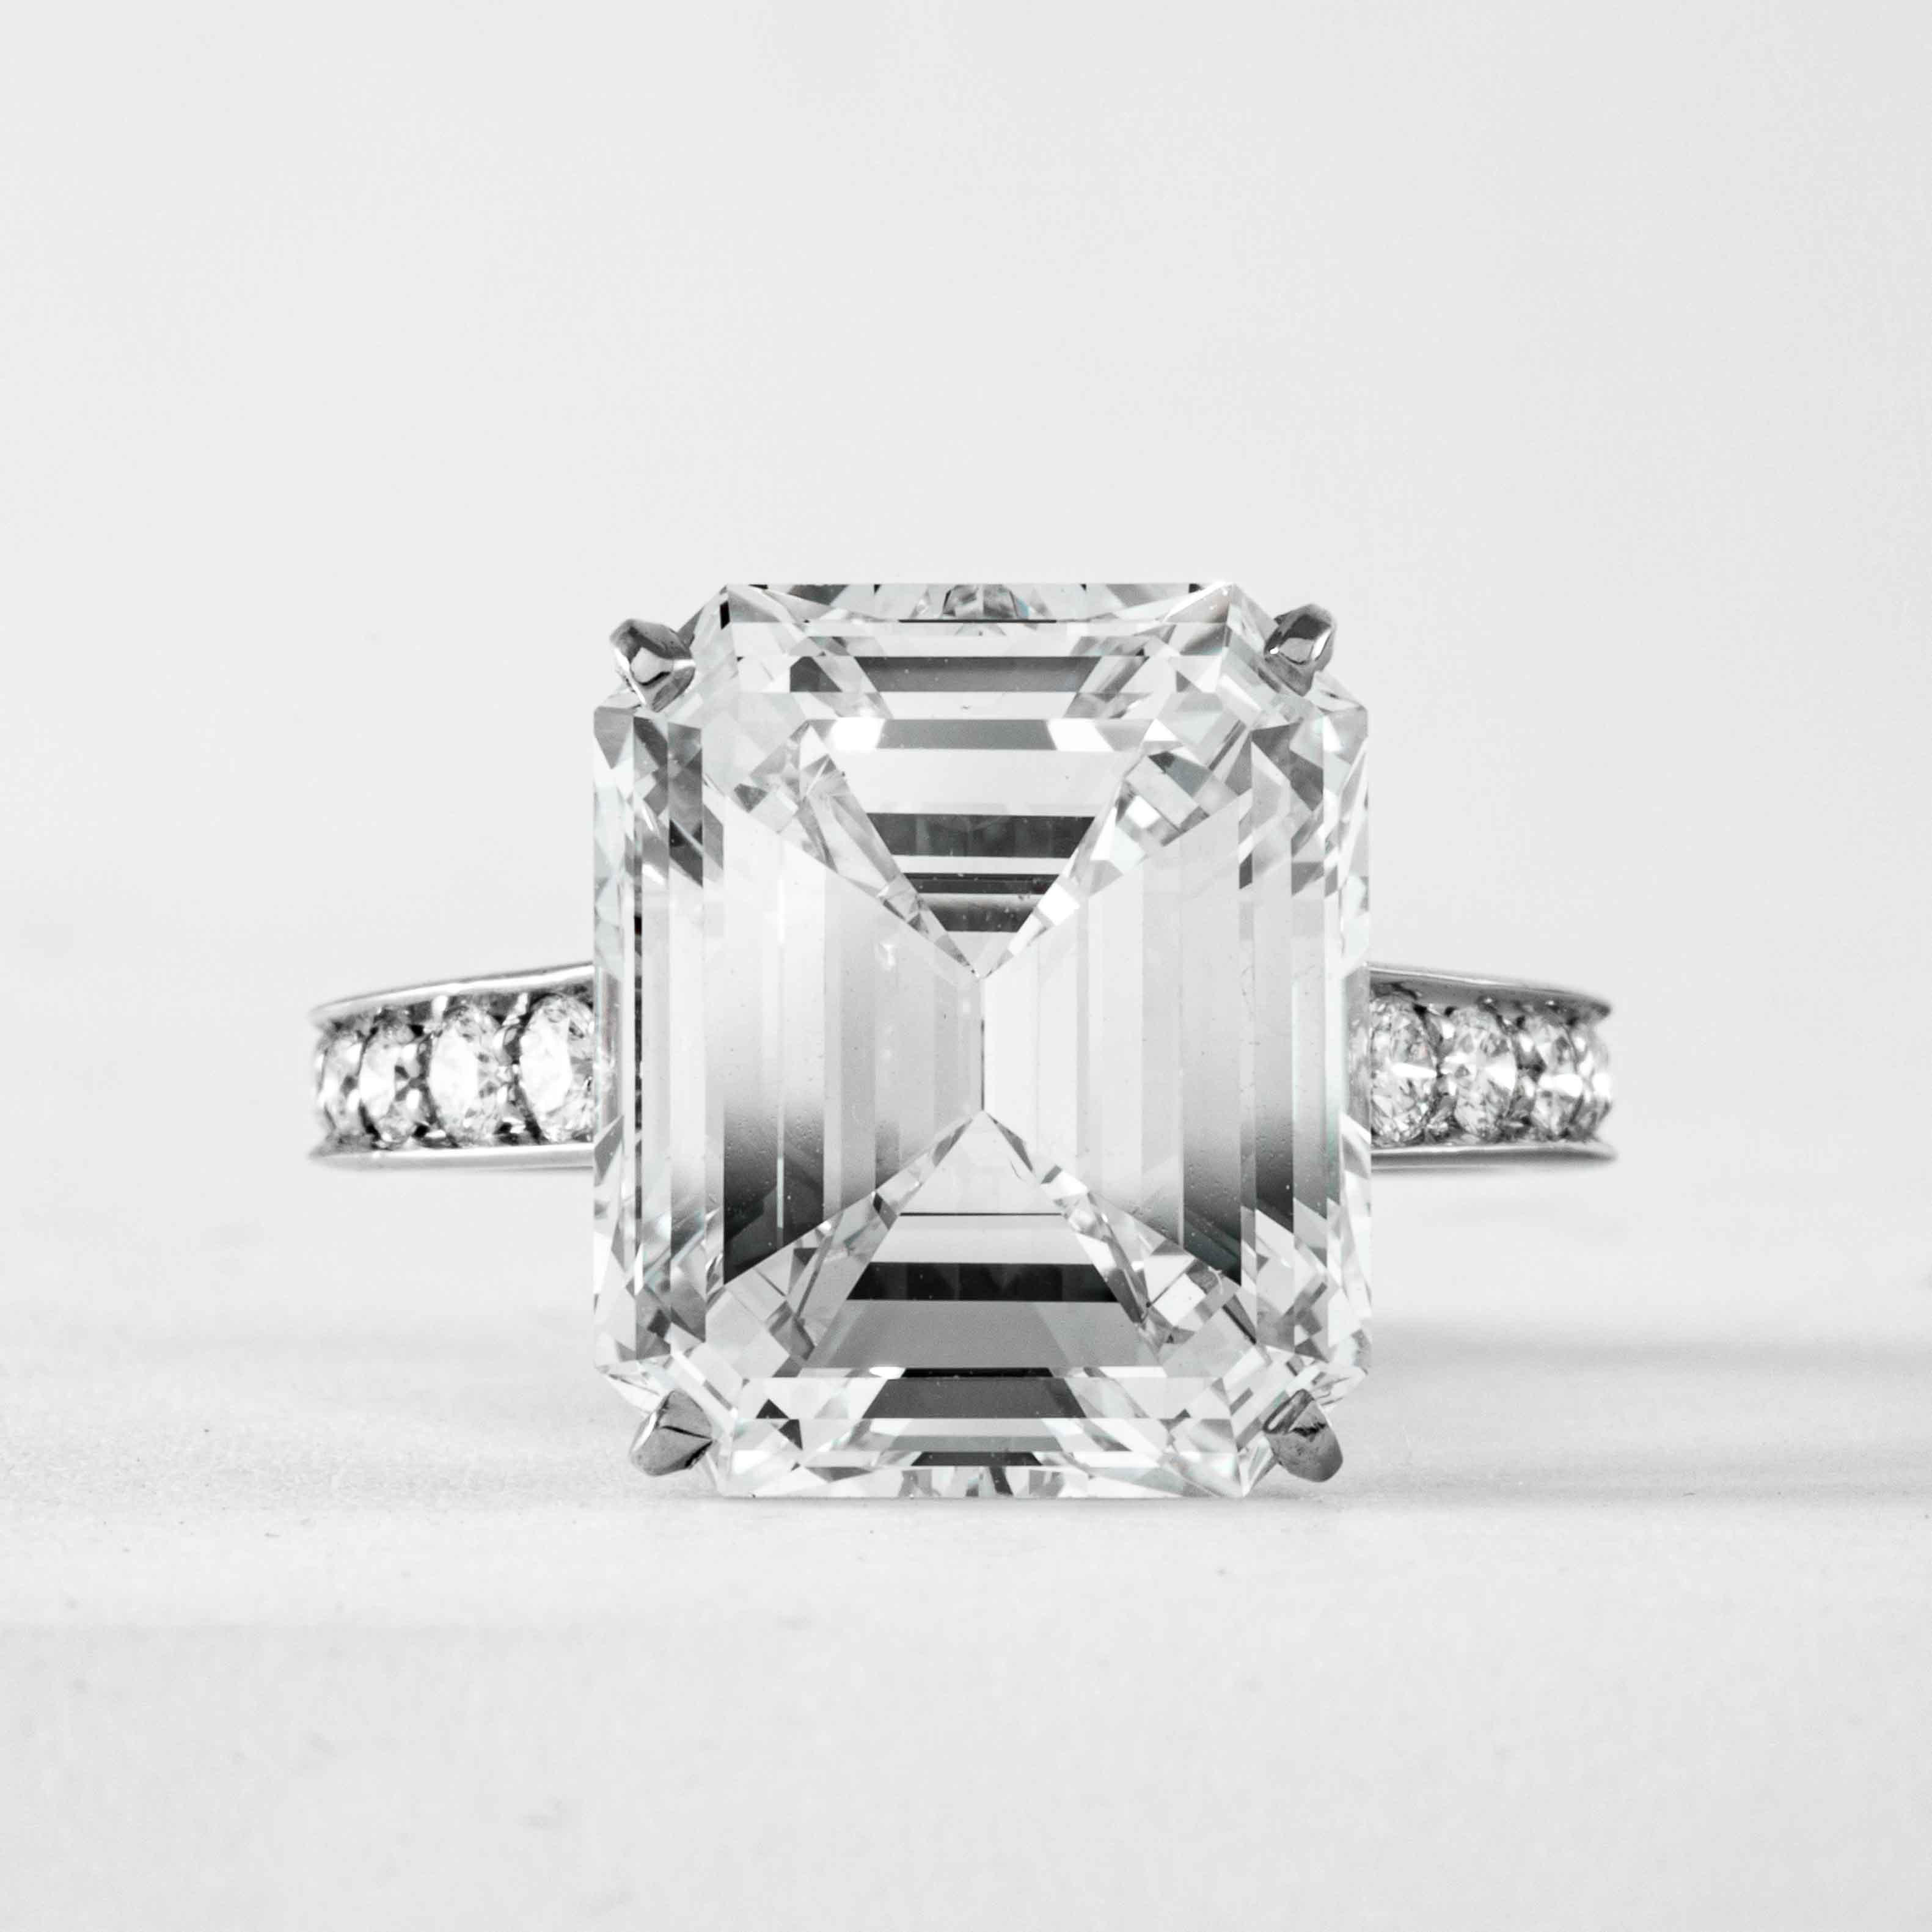 This impressive diamond ring is offered by Shreve, Crump & Low. This 10.29 carat GIA Certified I VS2 emerald cut diamond is custom set in a handcrafted Cartier platinum ring. The 10.29 carat emerald cut center diamond is accented by 18 round